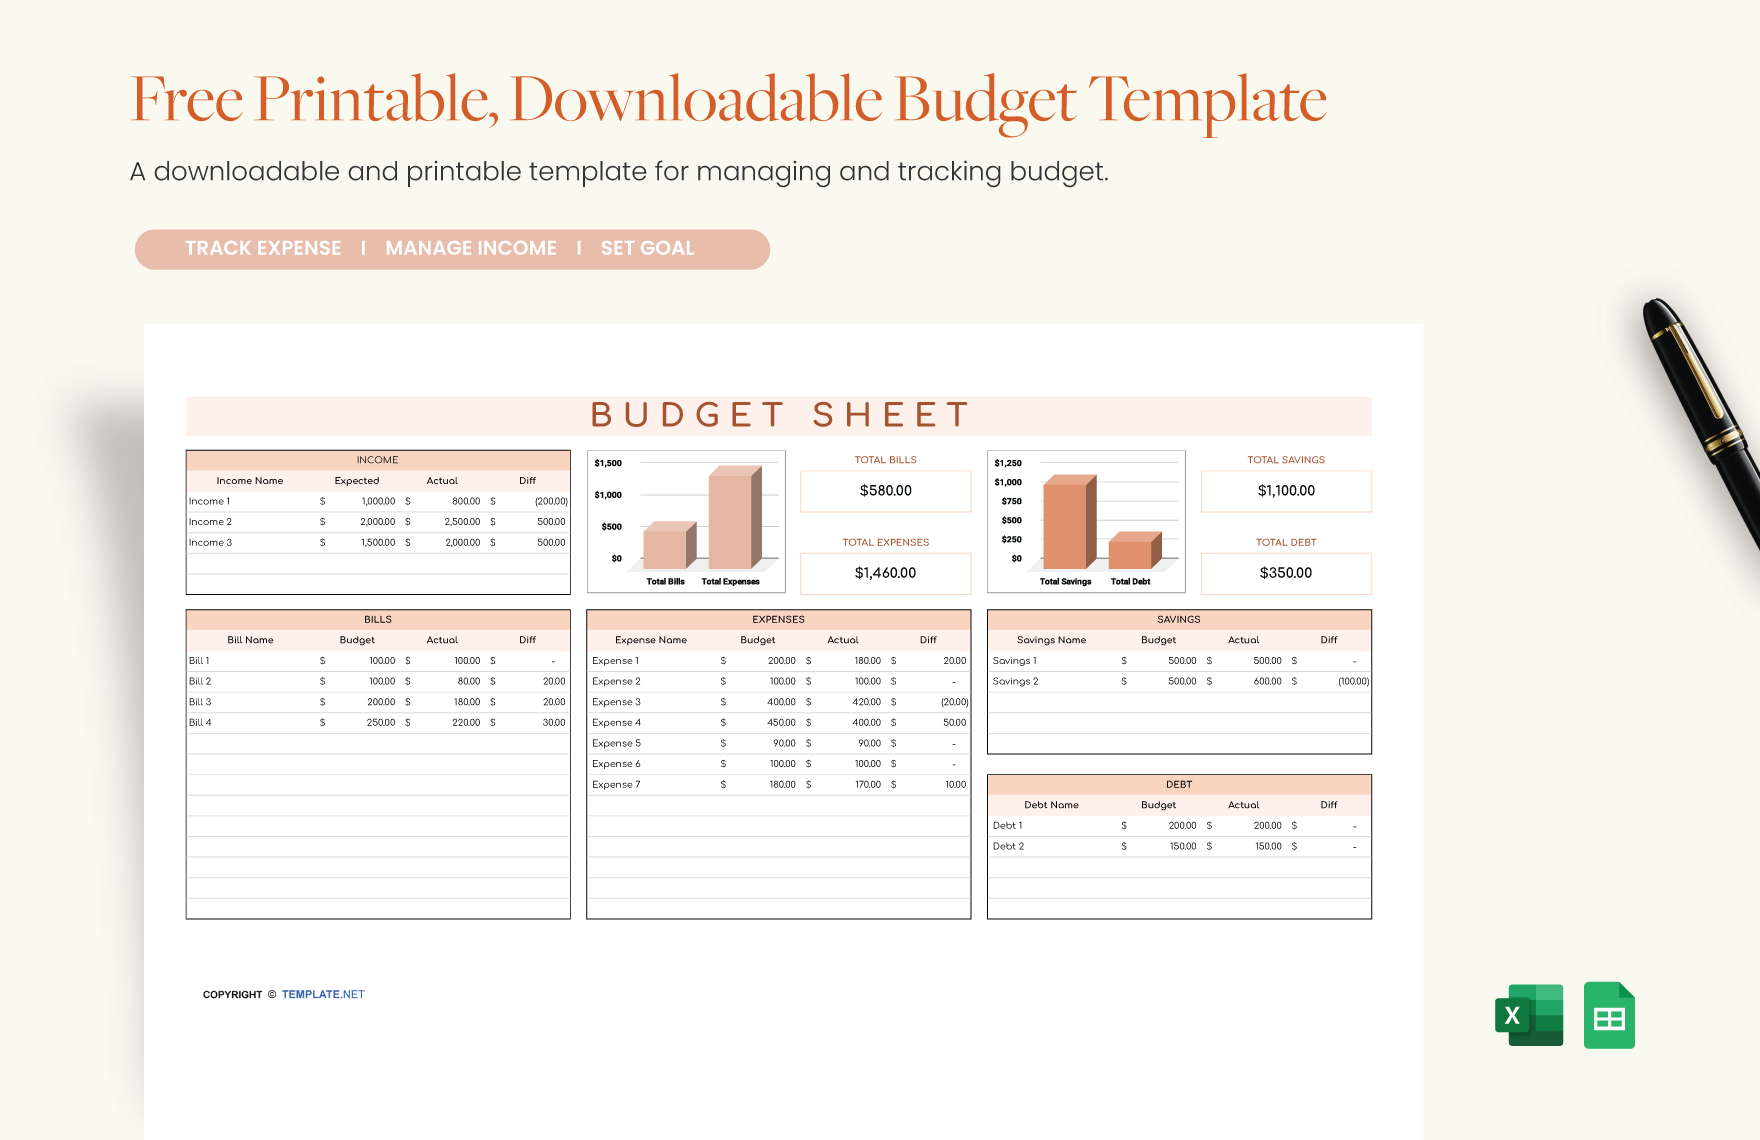 Free Printable, Downloadable Budget Template in Excel, Google Sheets